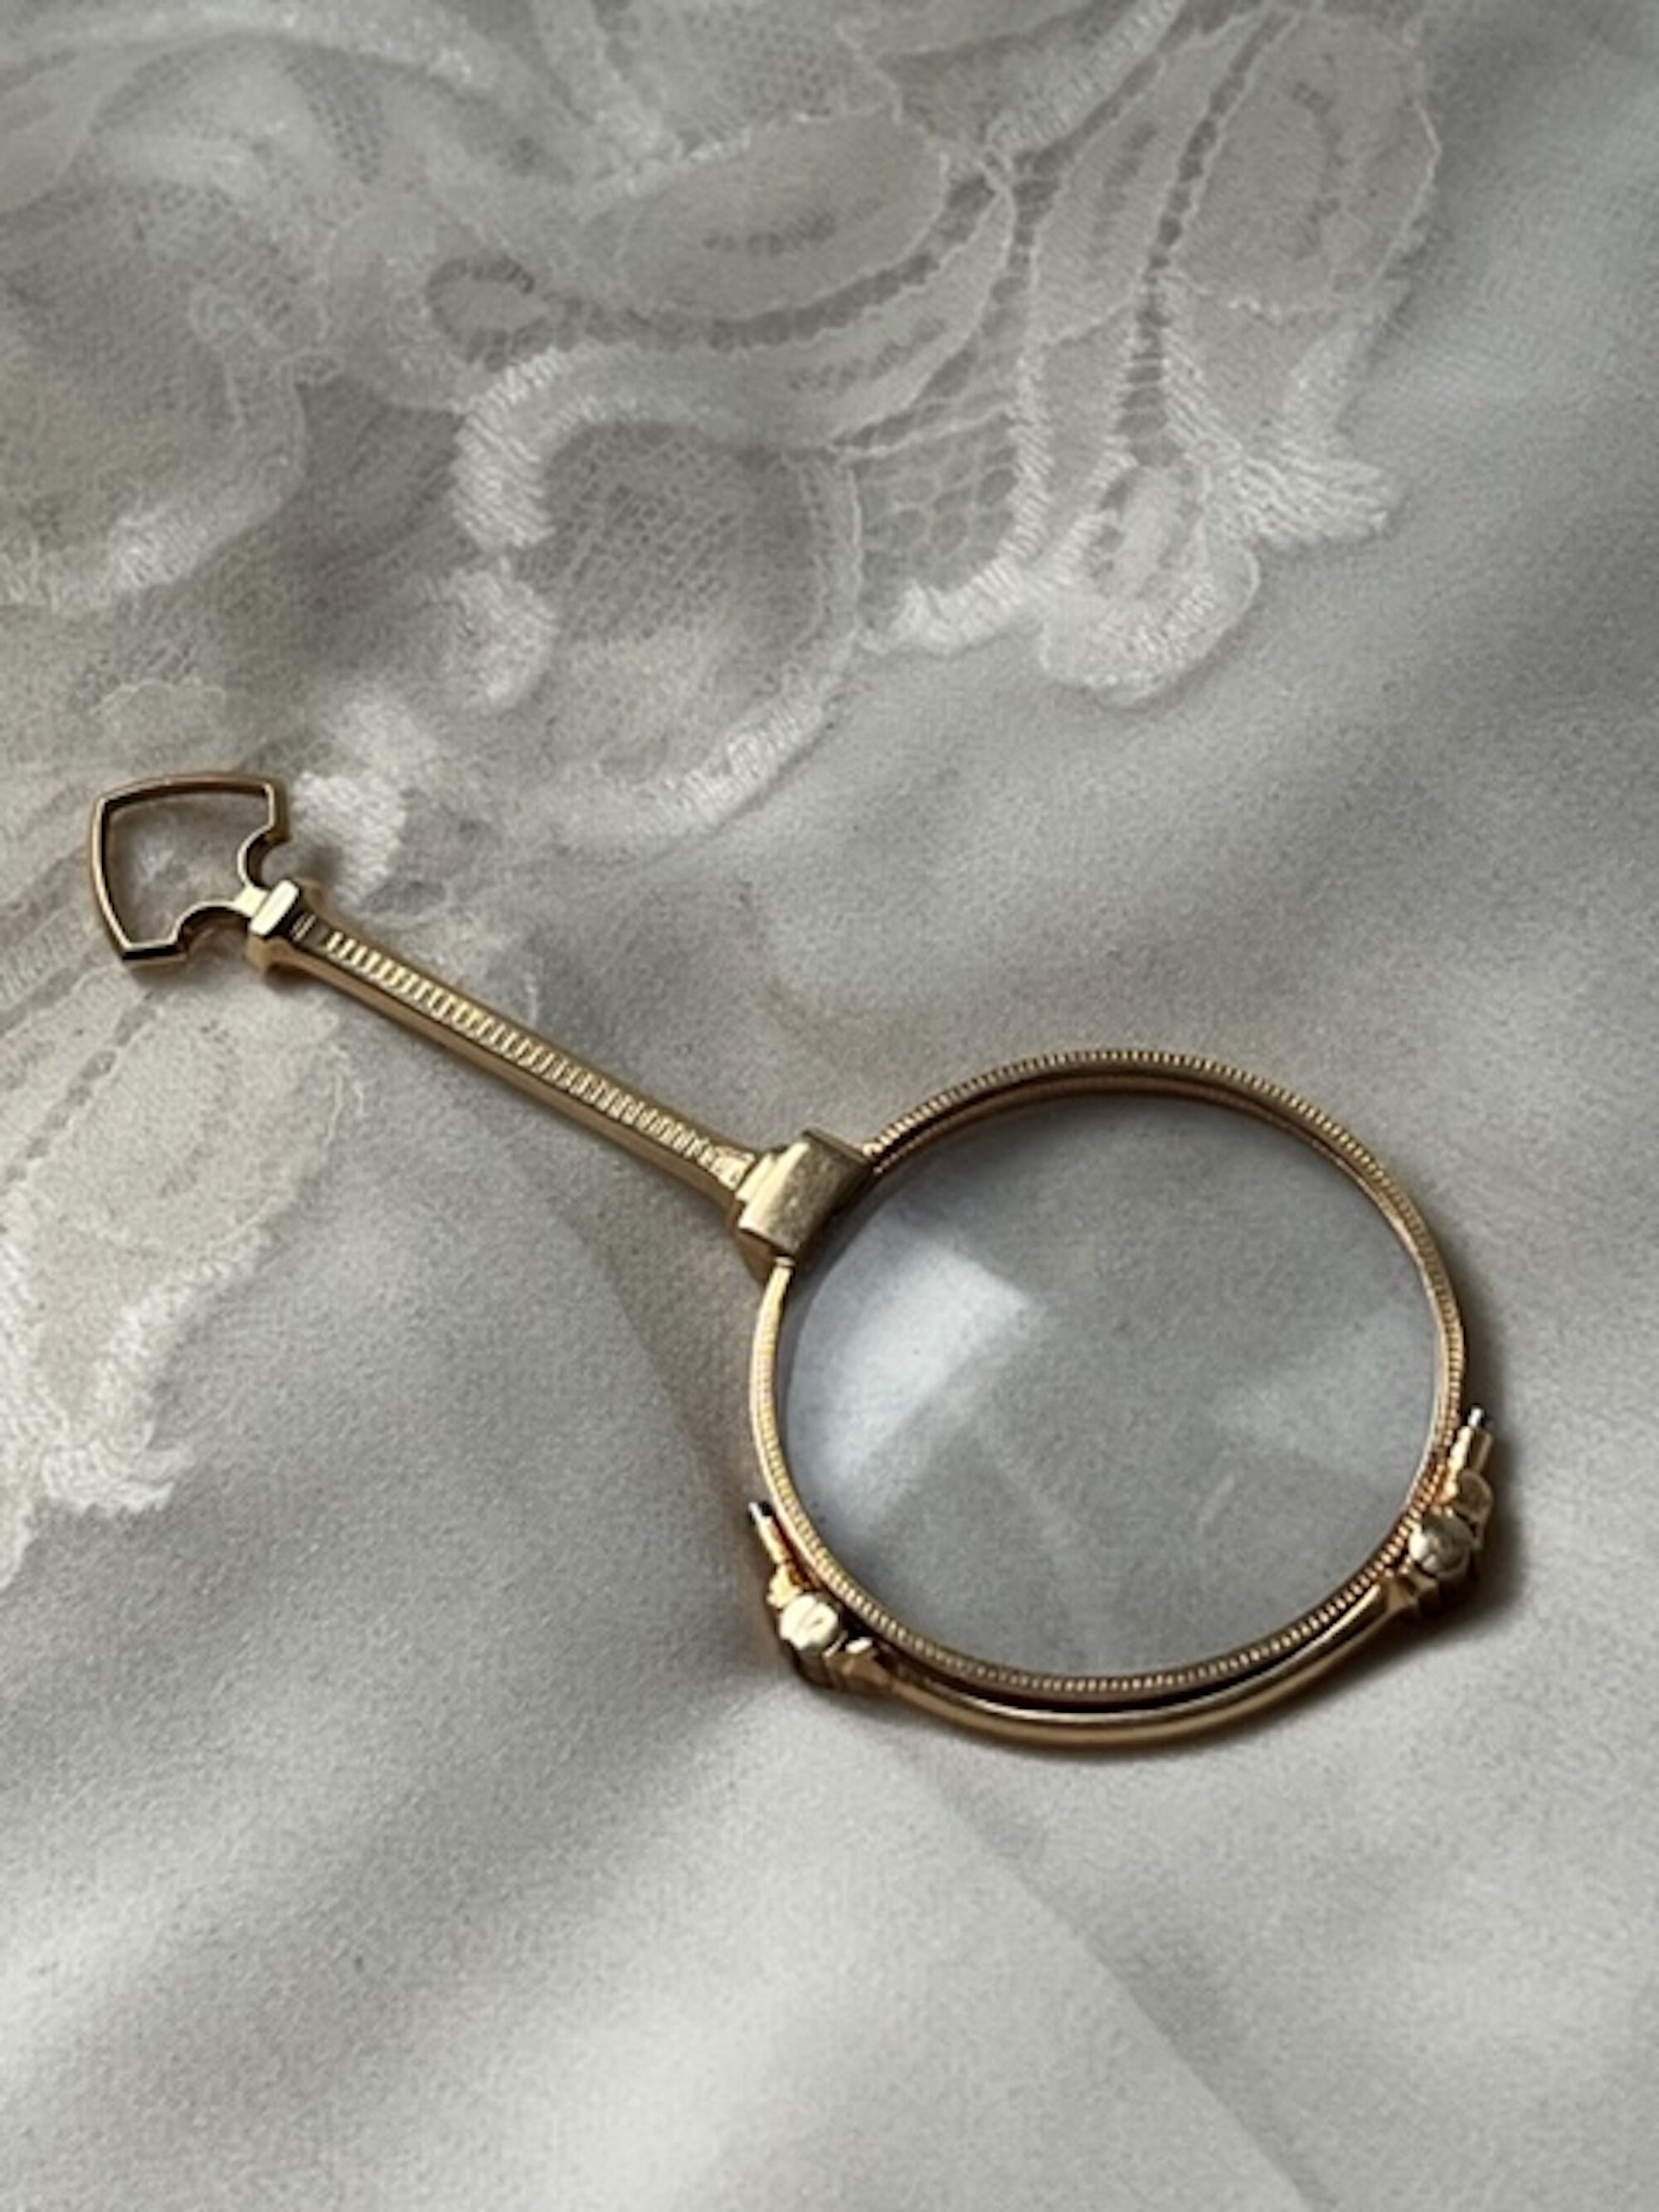 10k Yellow Gold Magnifying Glass JEWELERS LOUPE Pendant. Antique